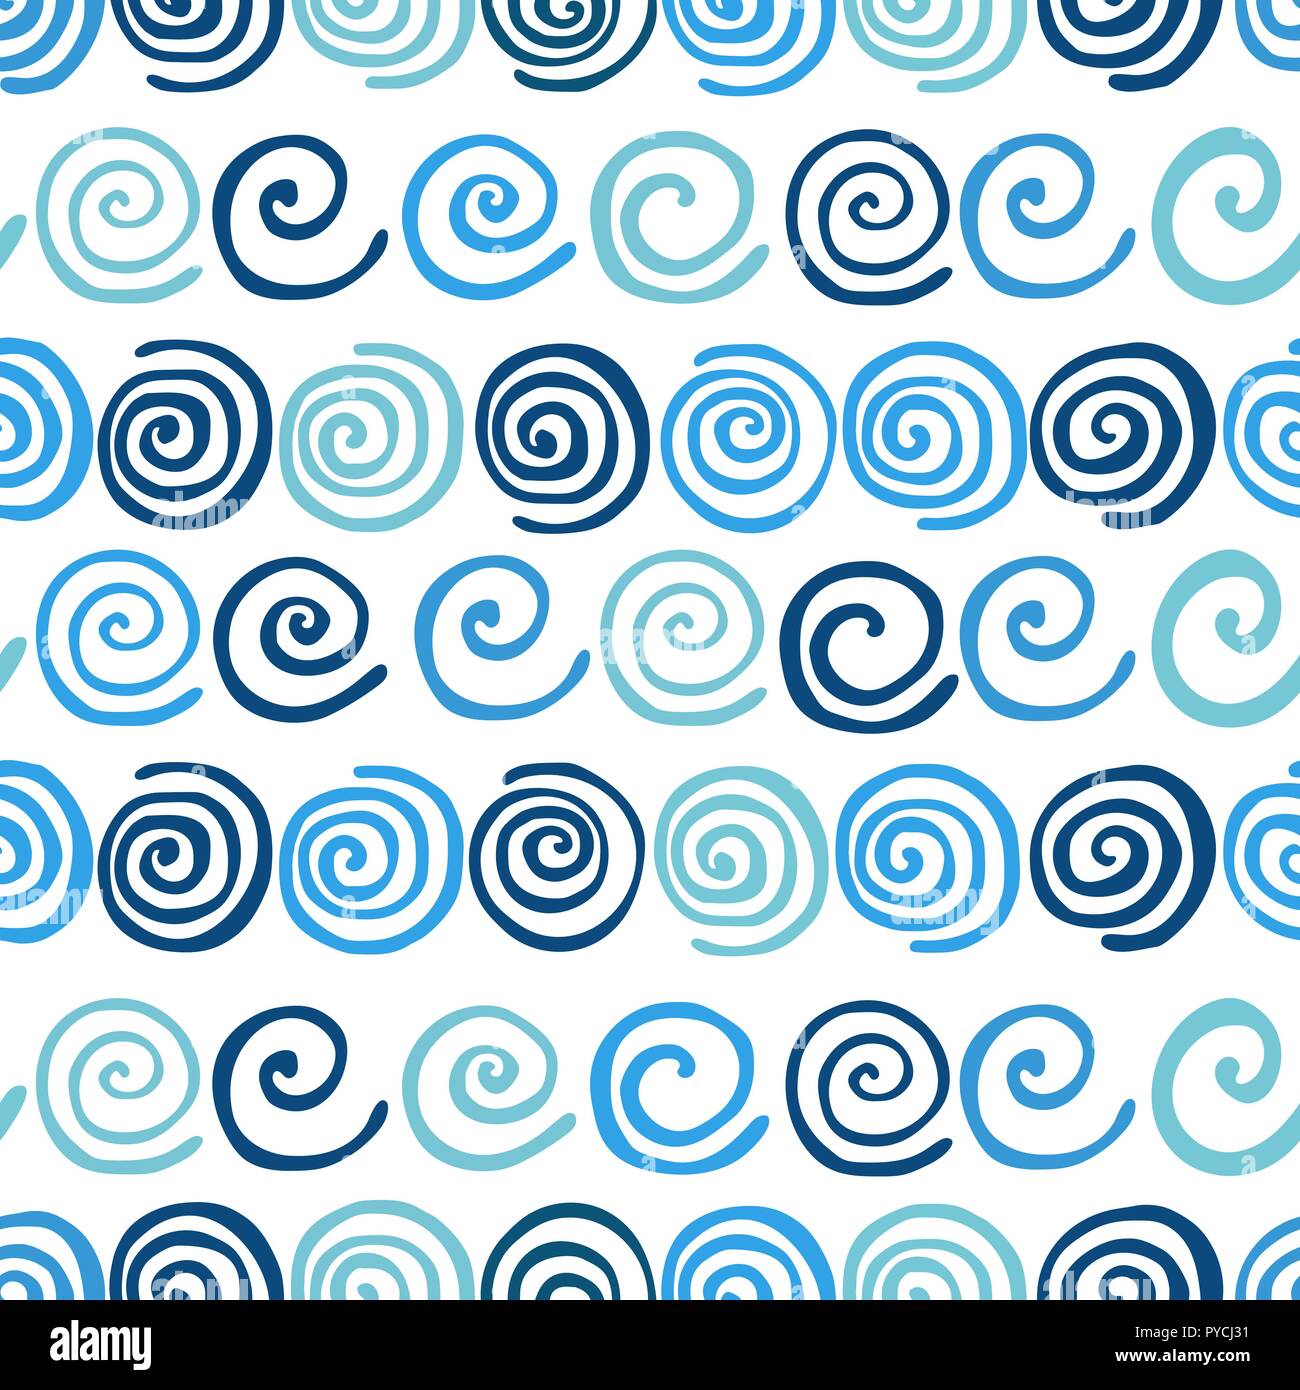 Blue summer waves seamless pattern. Sea water whirls on white background. Cute doodle pattern for your design. Stock Vector